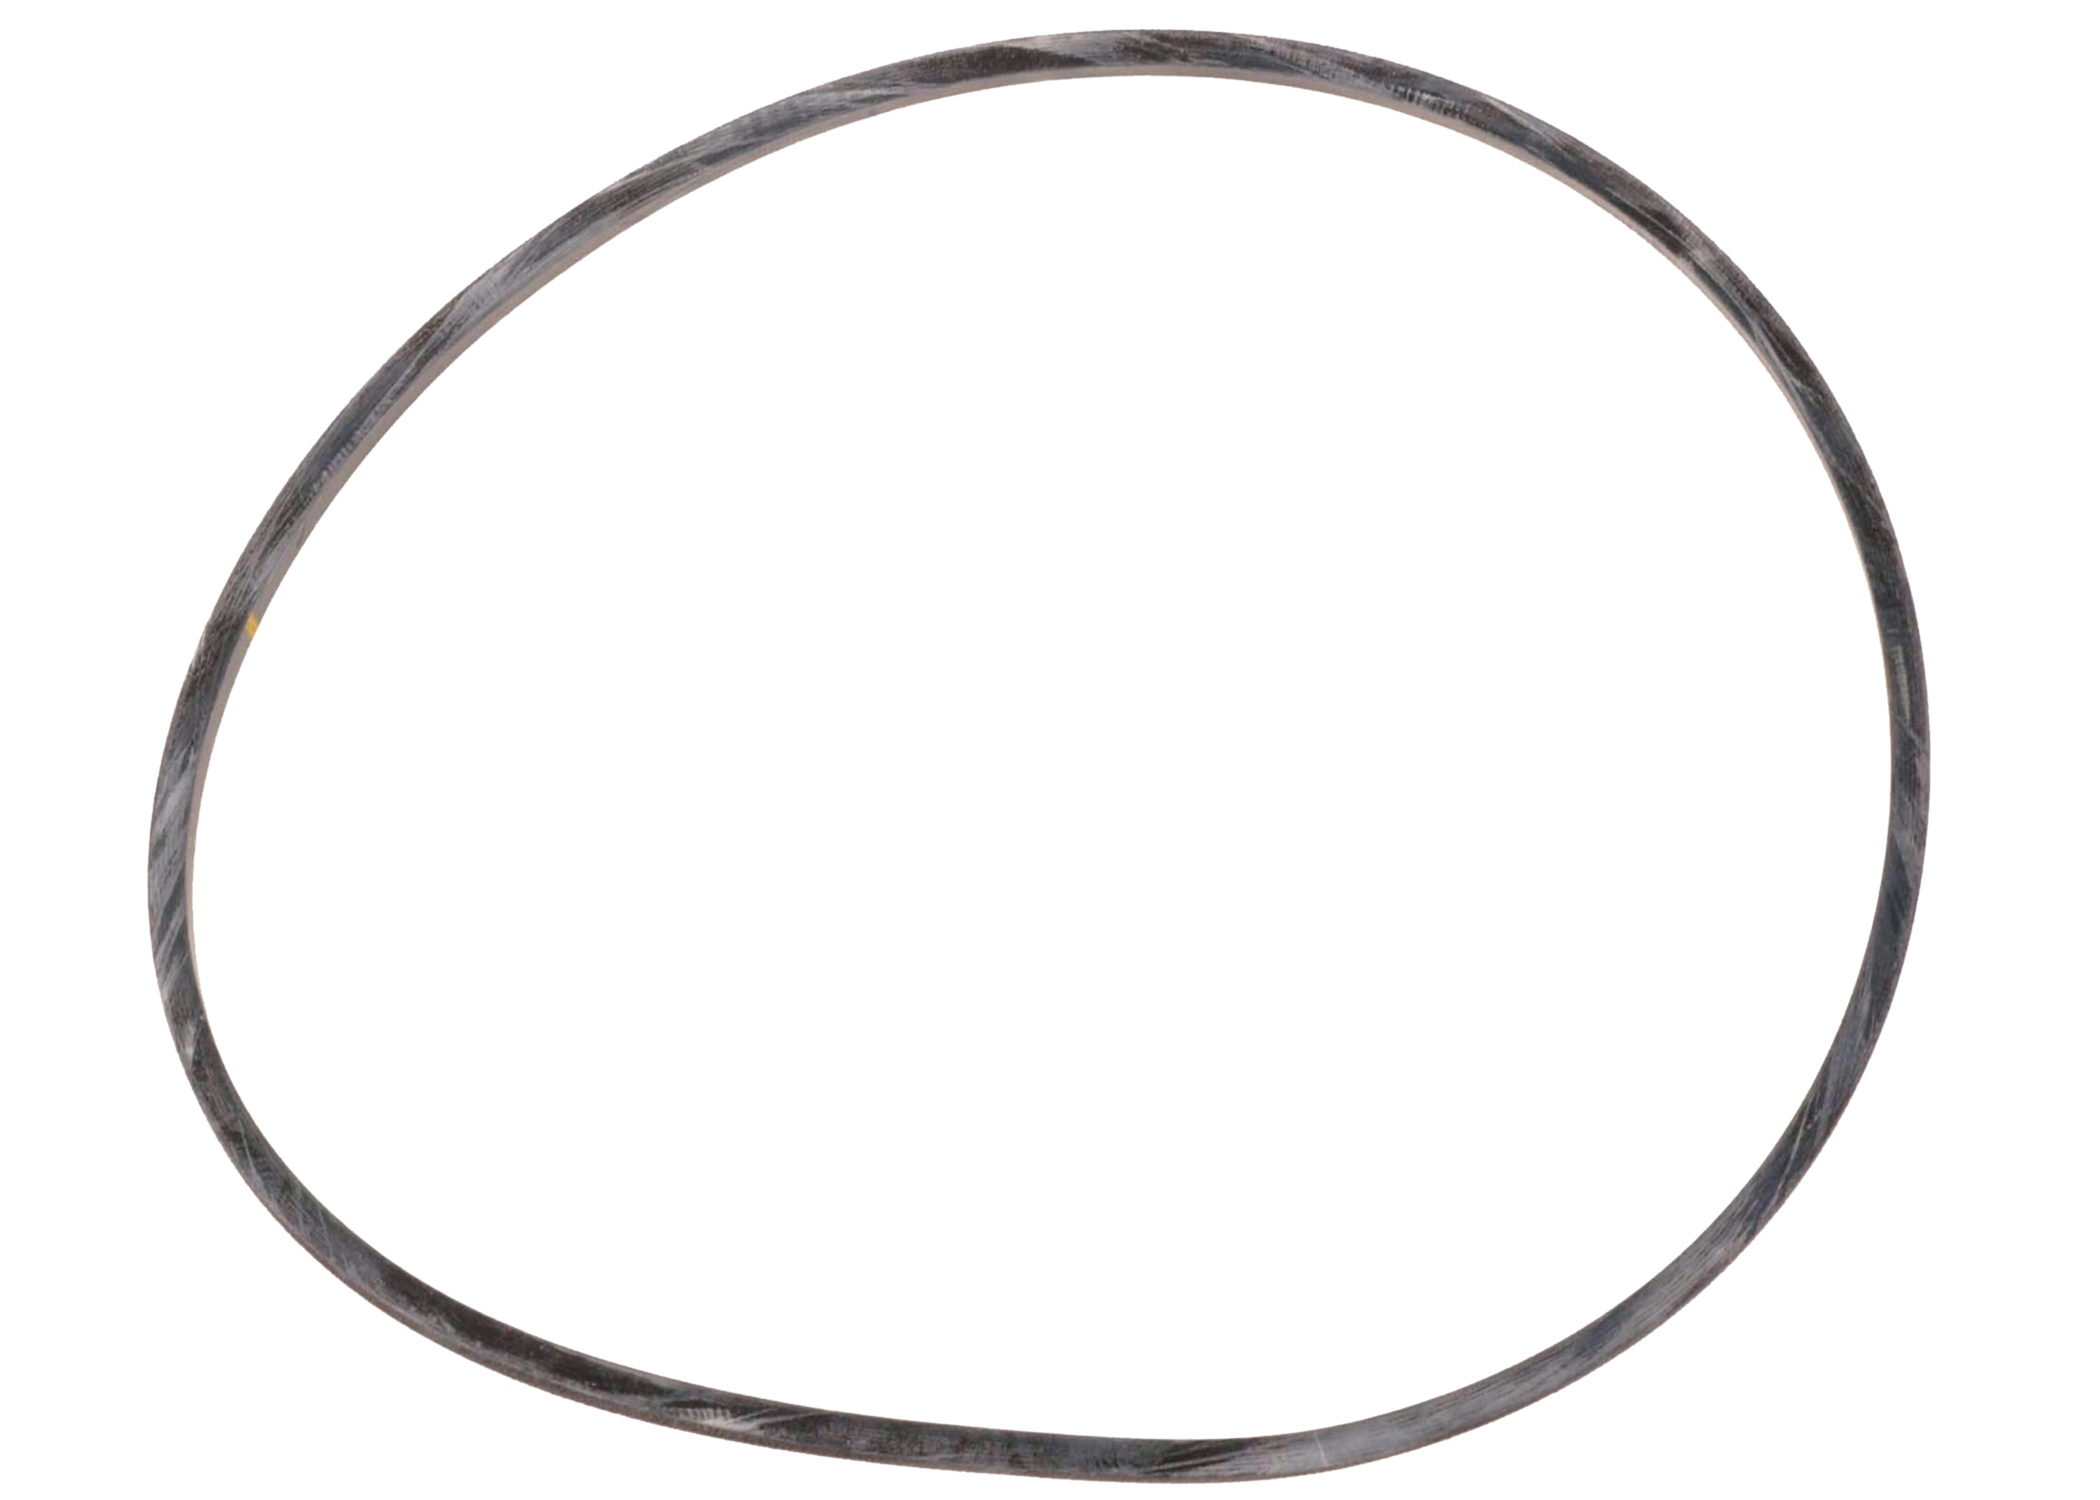 GM GENUINE PARTS CANADA - Automatic Transmission Extension Housing Gasket - GMC 8651419